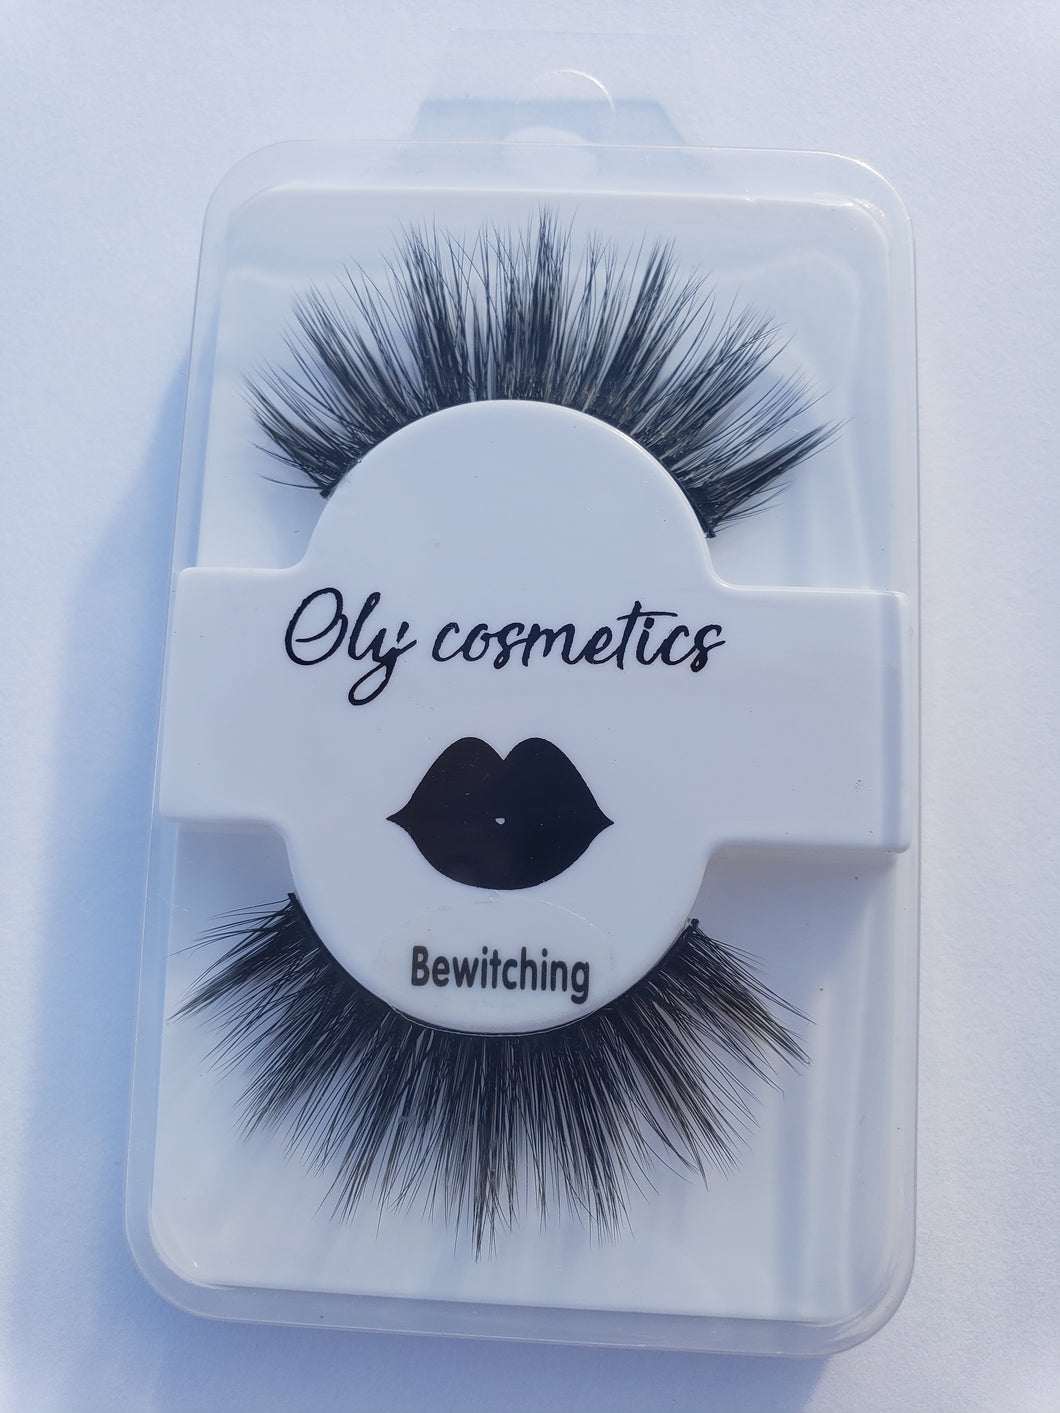 Eye Lashes (One pair). Assorted styles